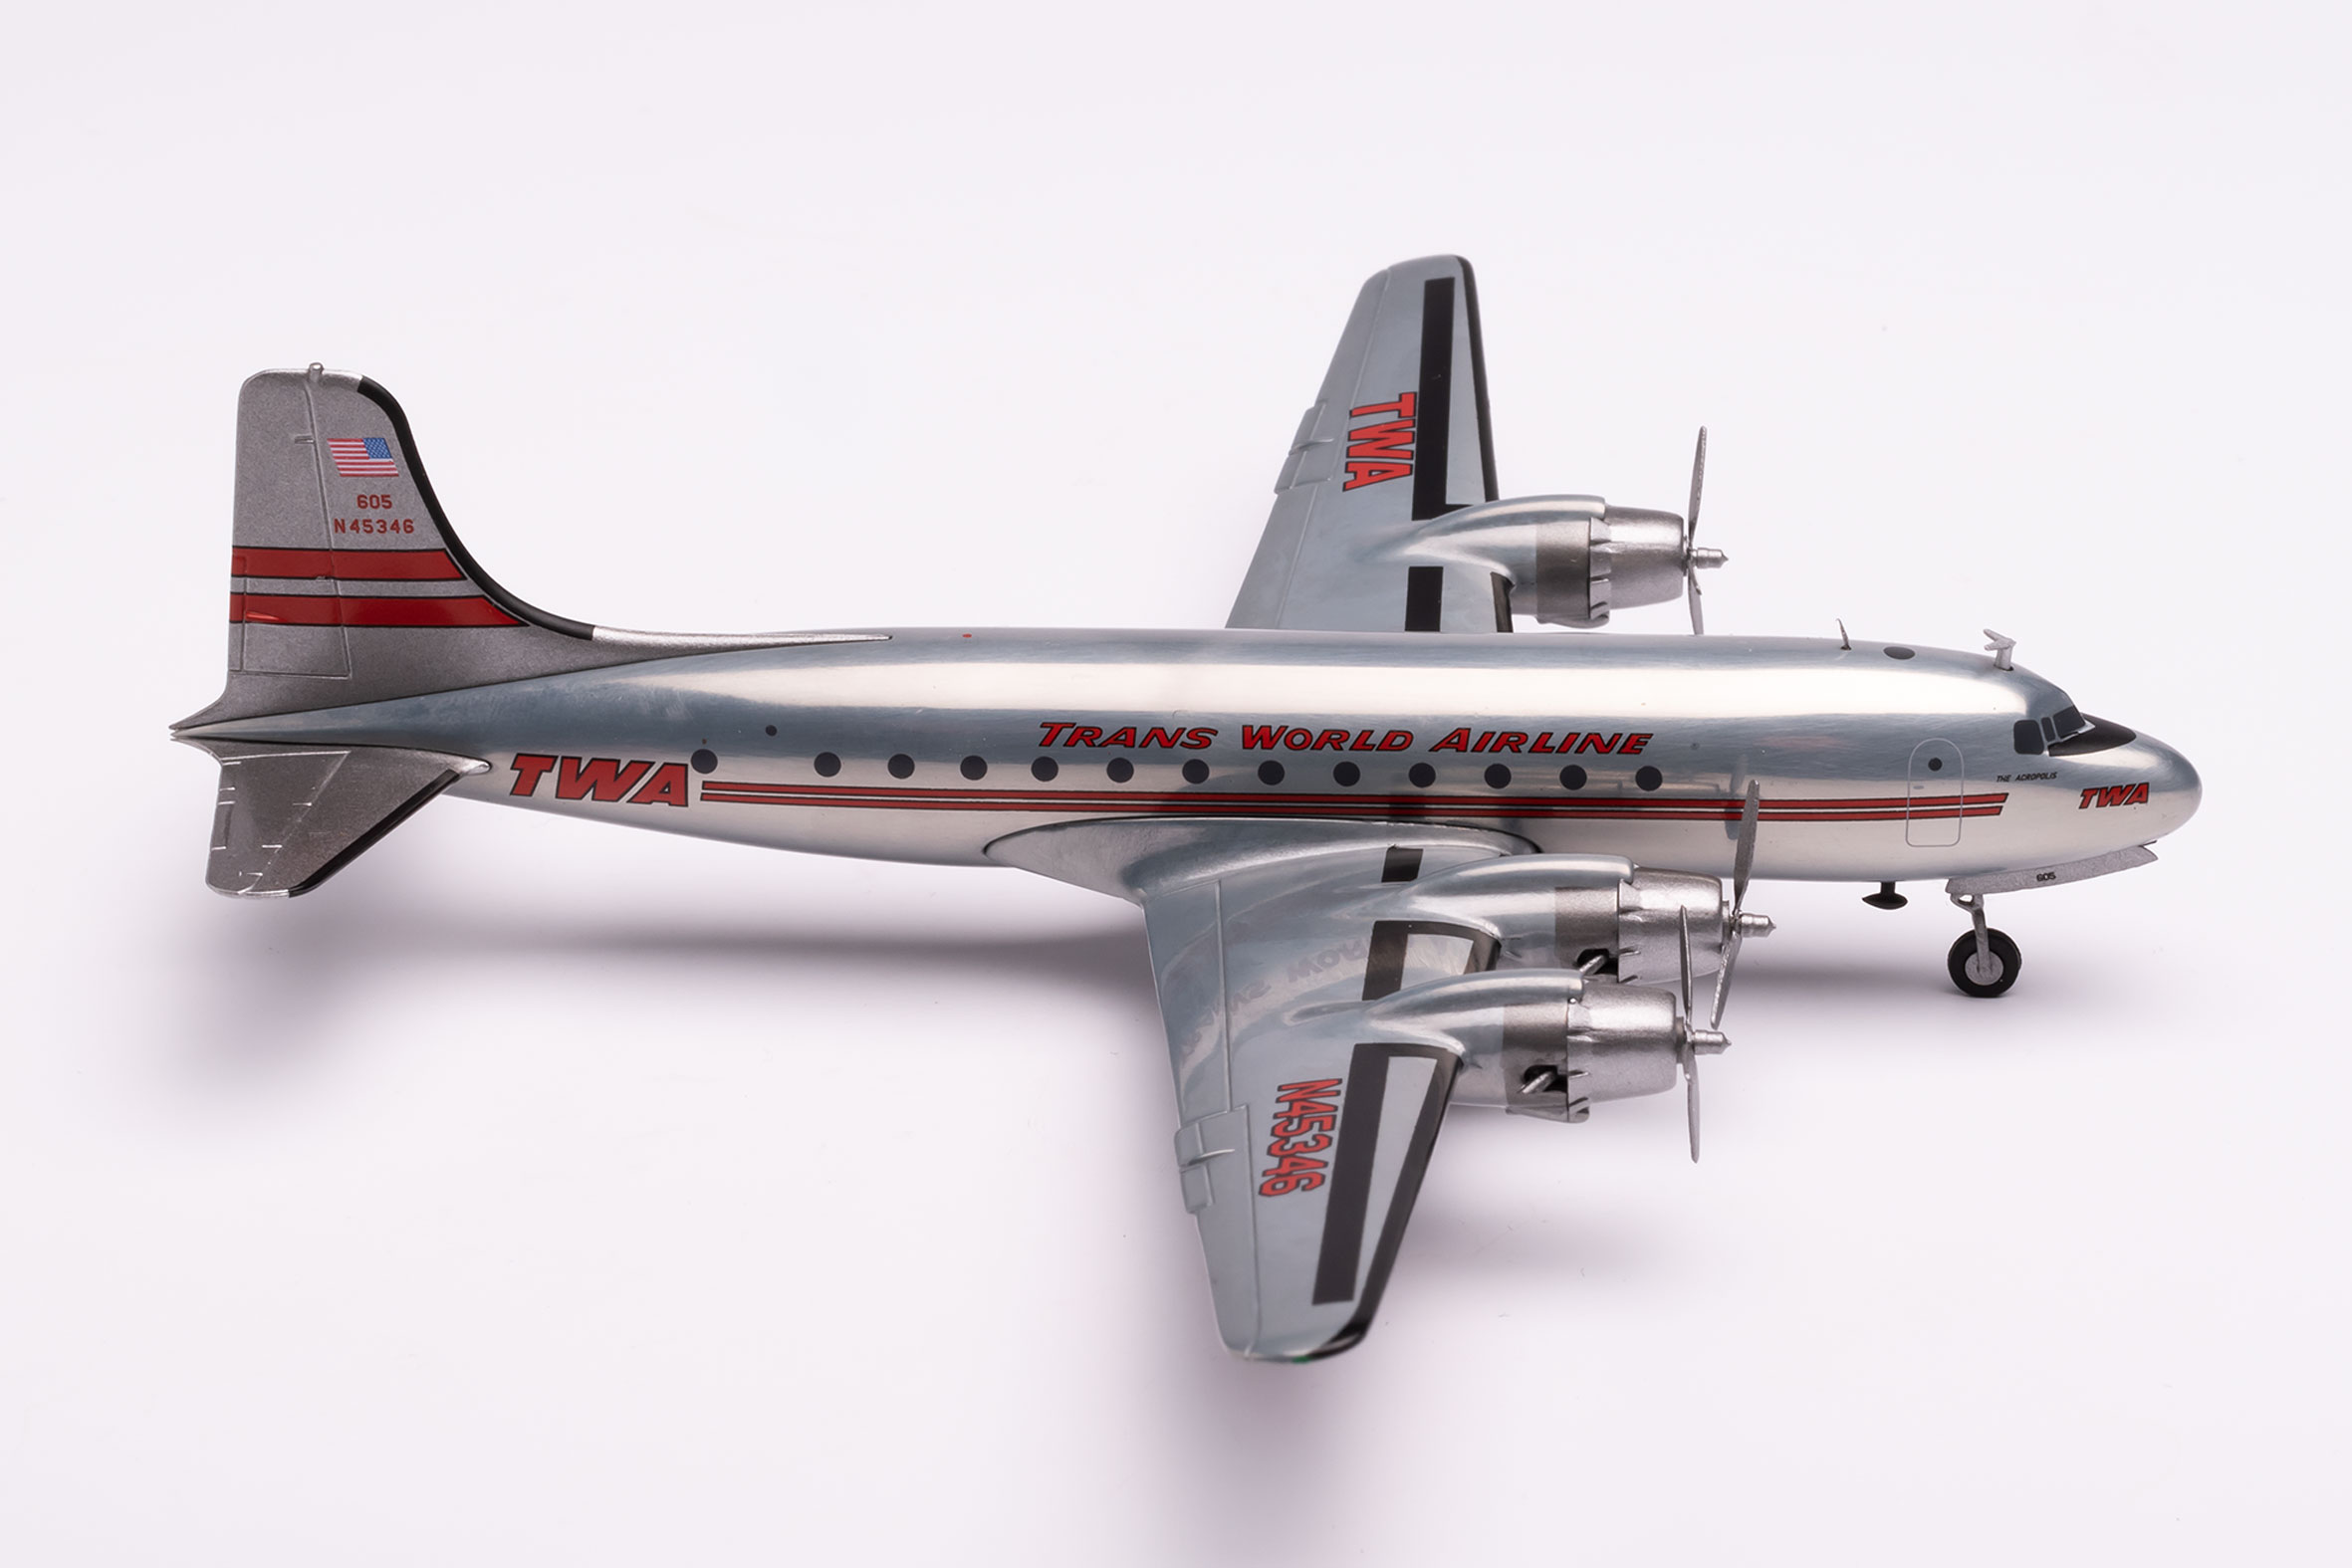 Douglas DC-3 Passenger Aircraft Trans World Airlines - Victory is in the  Air 1/144 Diecast Model Airplane by Postage Stamp 